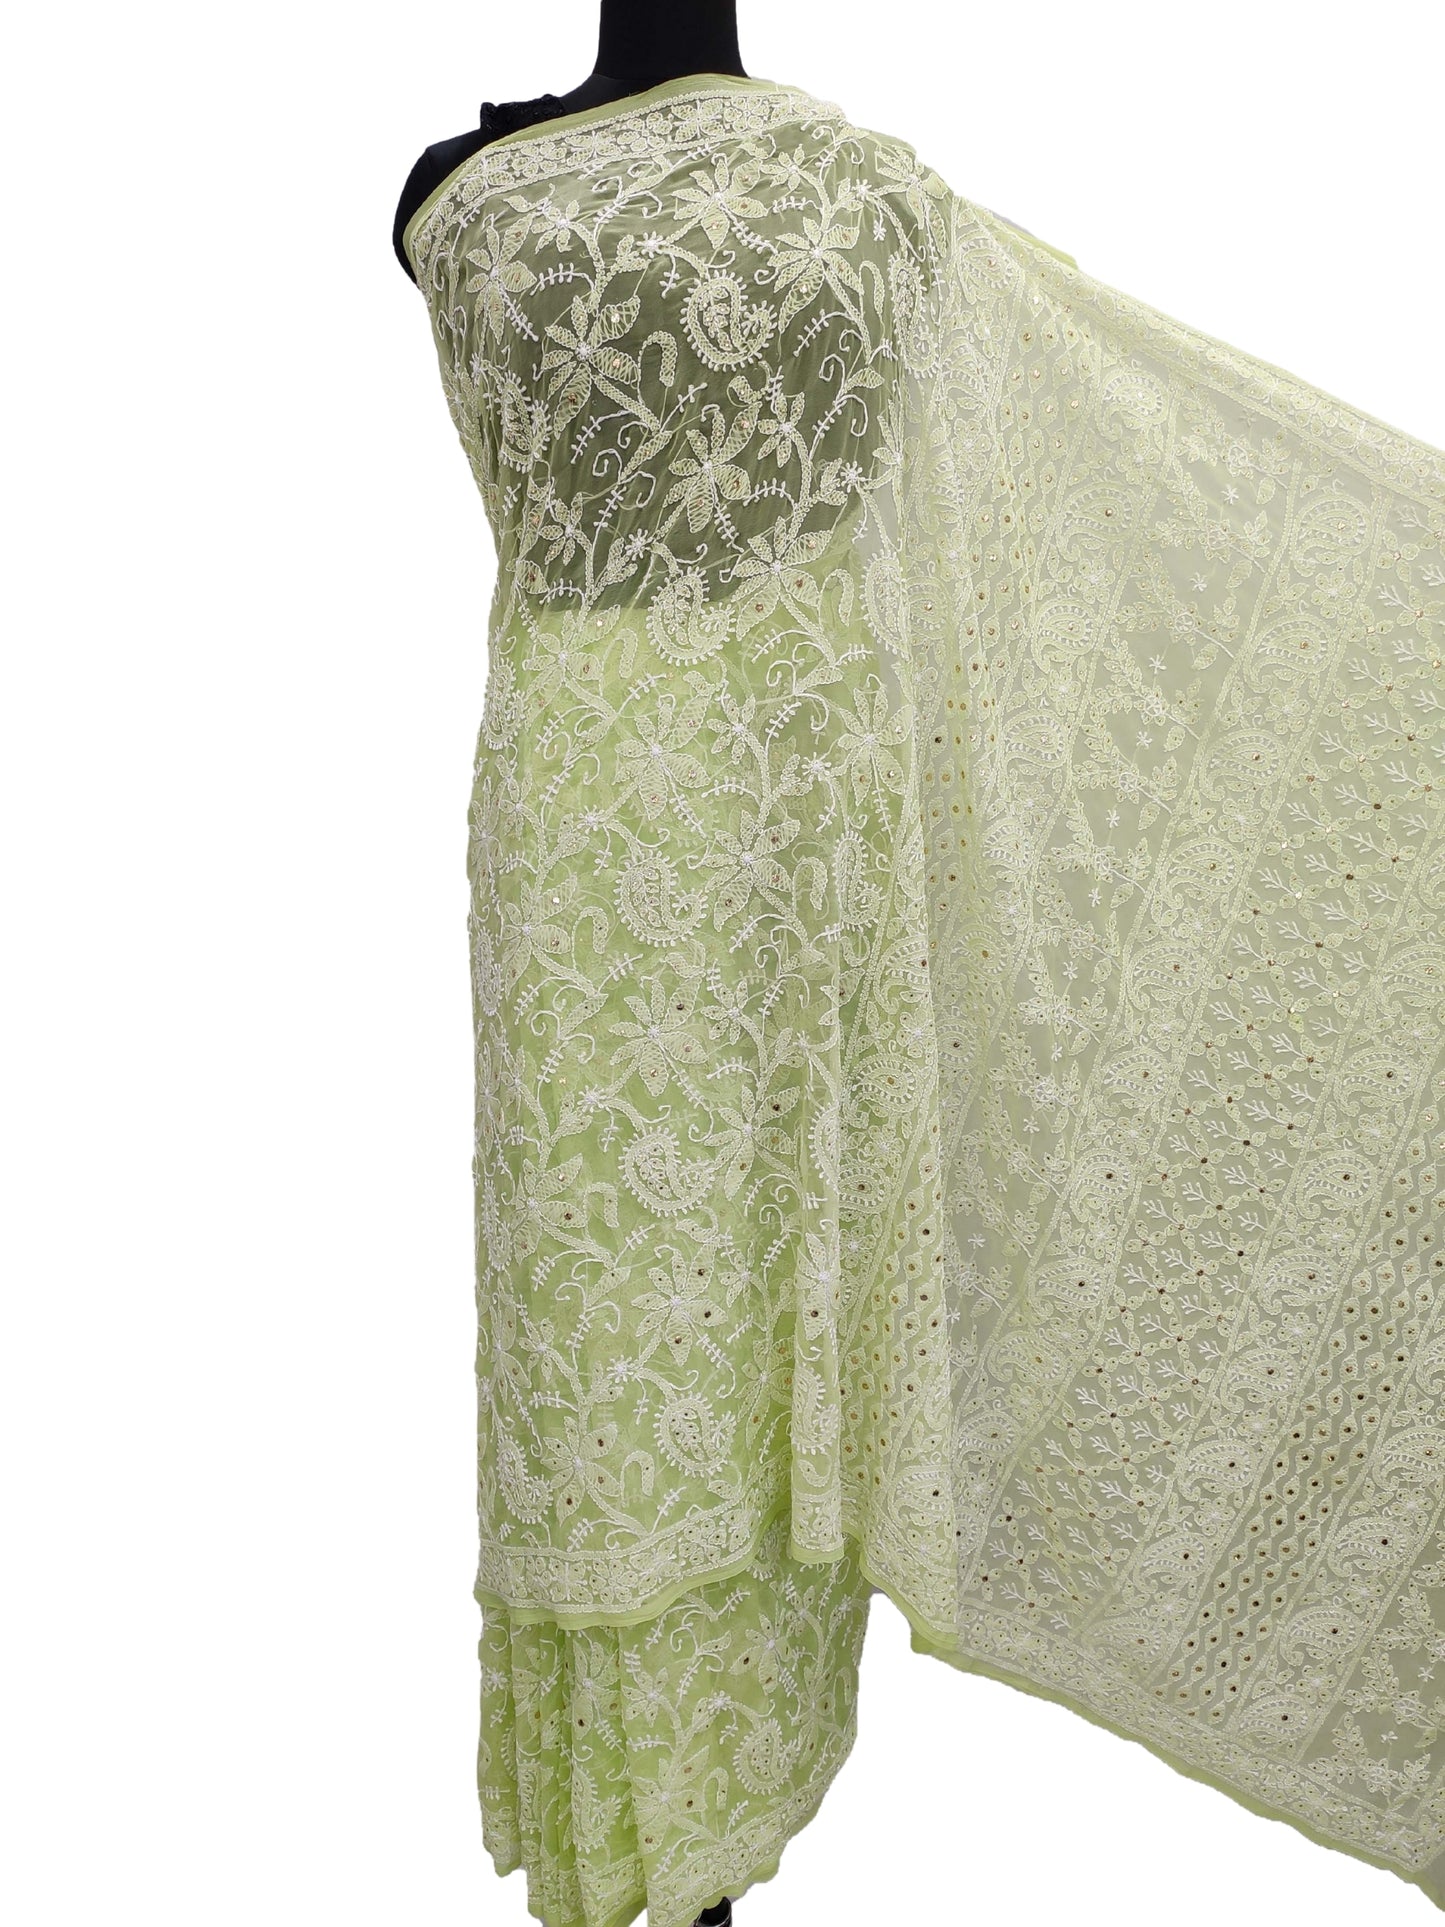 Shyamal Chikan Hand Embroidered Green High Quality Georgette Lucknowi Chikankari Full Jaal Saree With Blouse Piece And Mukaish Work - S9919